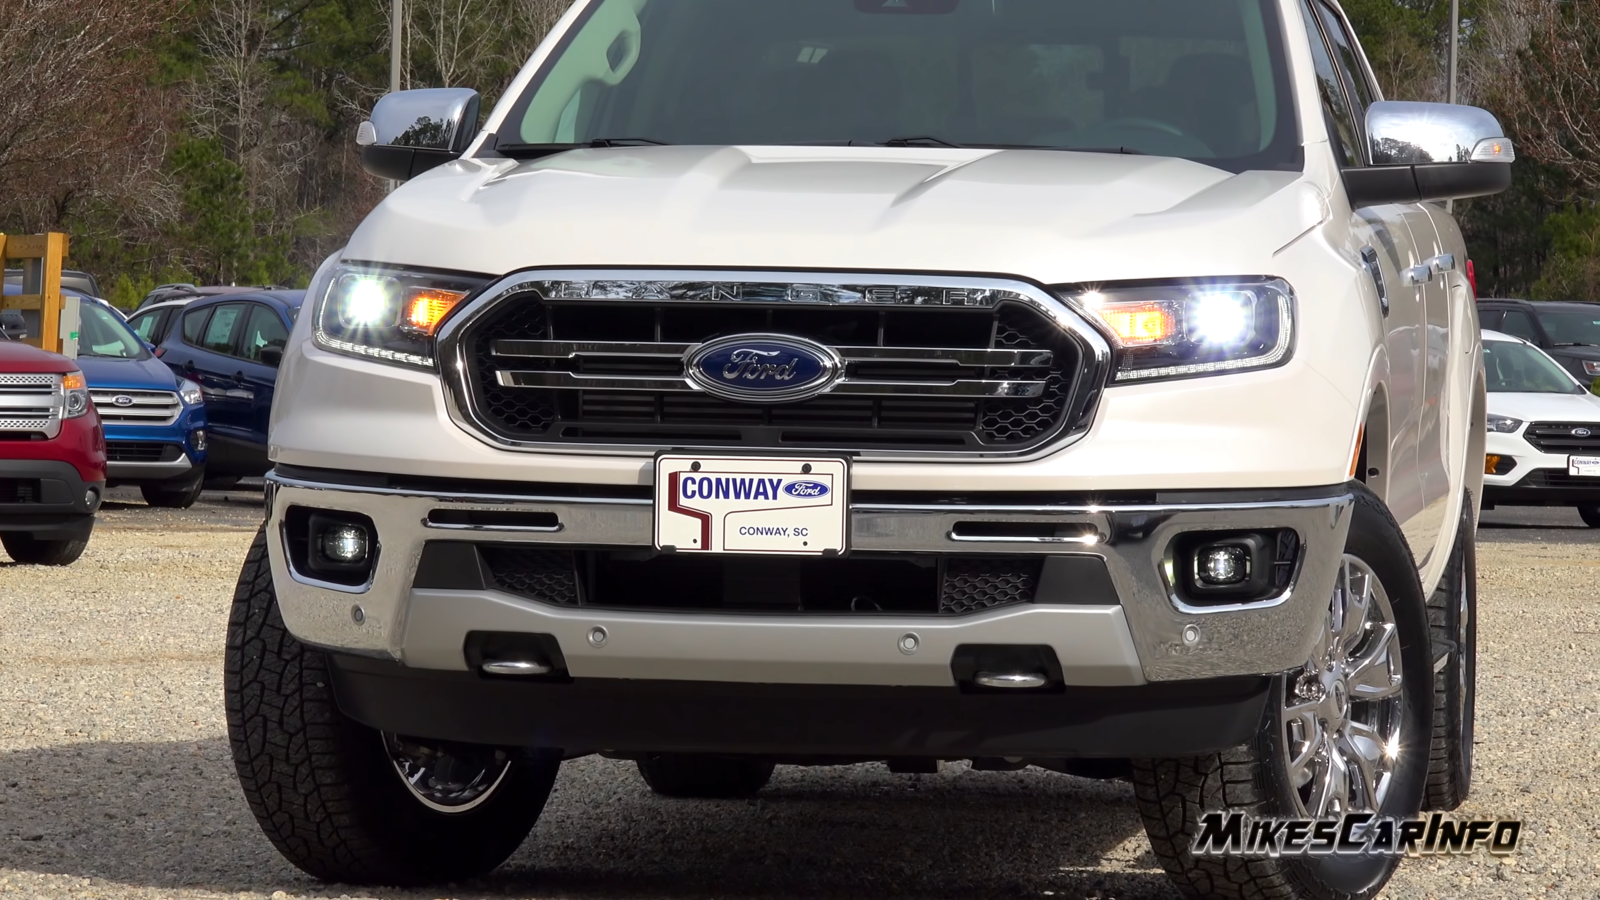 Ford Ranger Lariat Photos/videos with Headlights on 2019 Ford Ranger Lariat - Ultimate In-Depth Look in 4K 2-40 screenshot